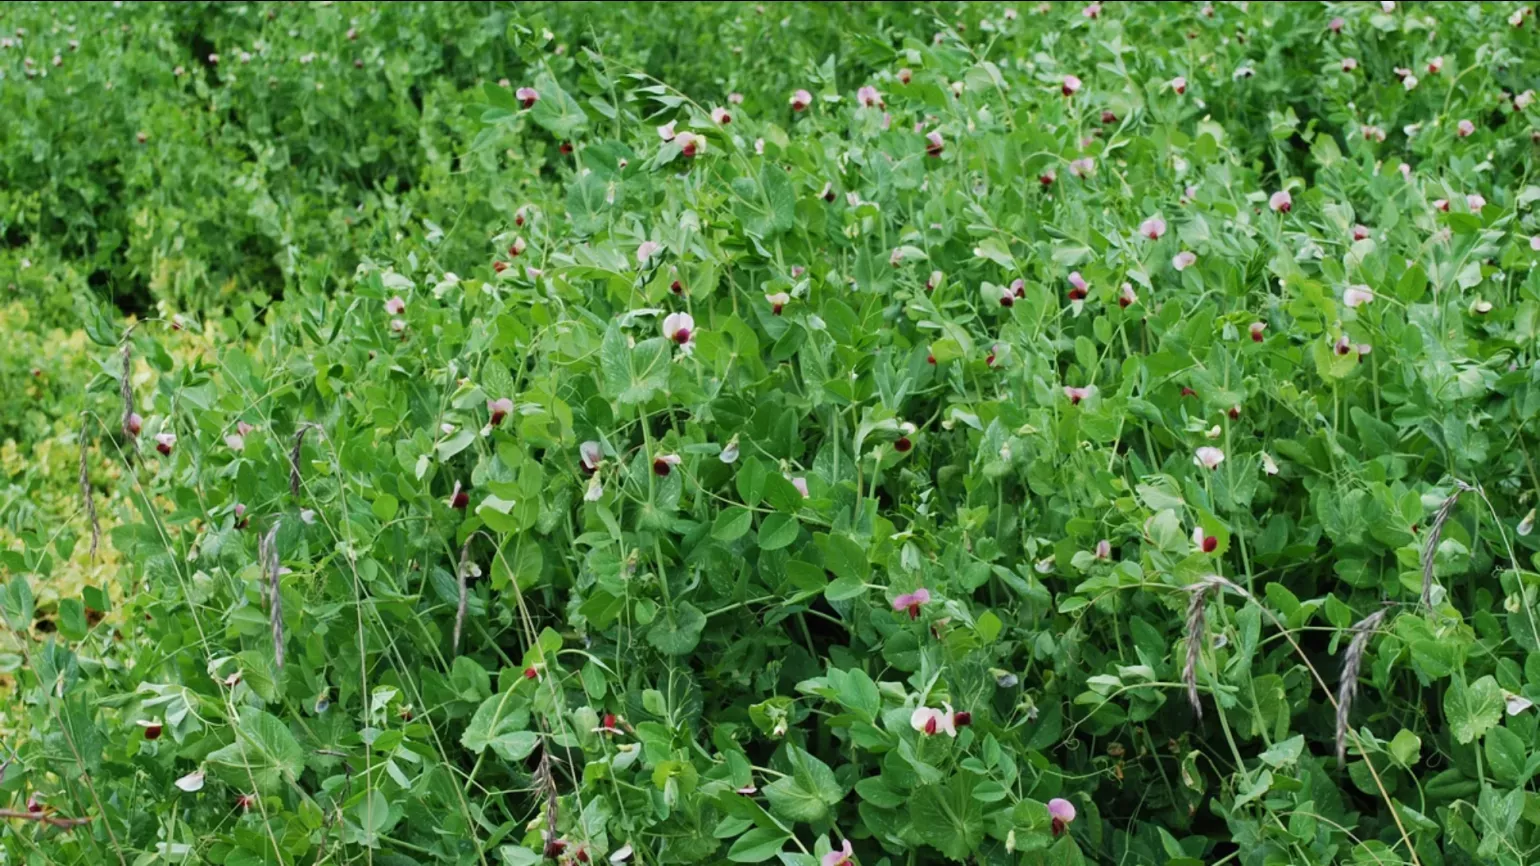 A large group of pea plants with small white purple flowers